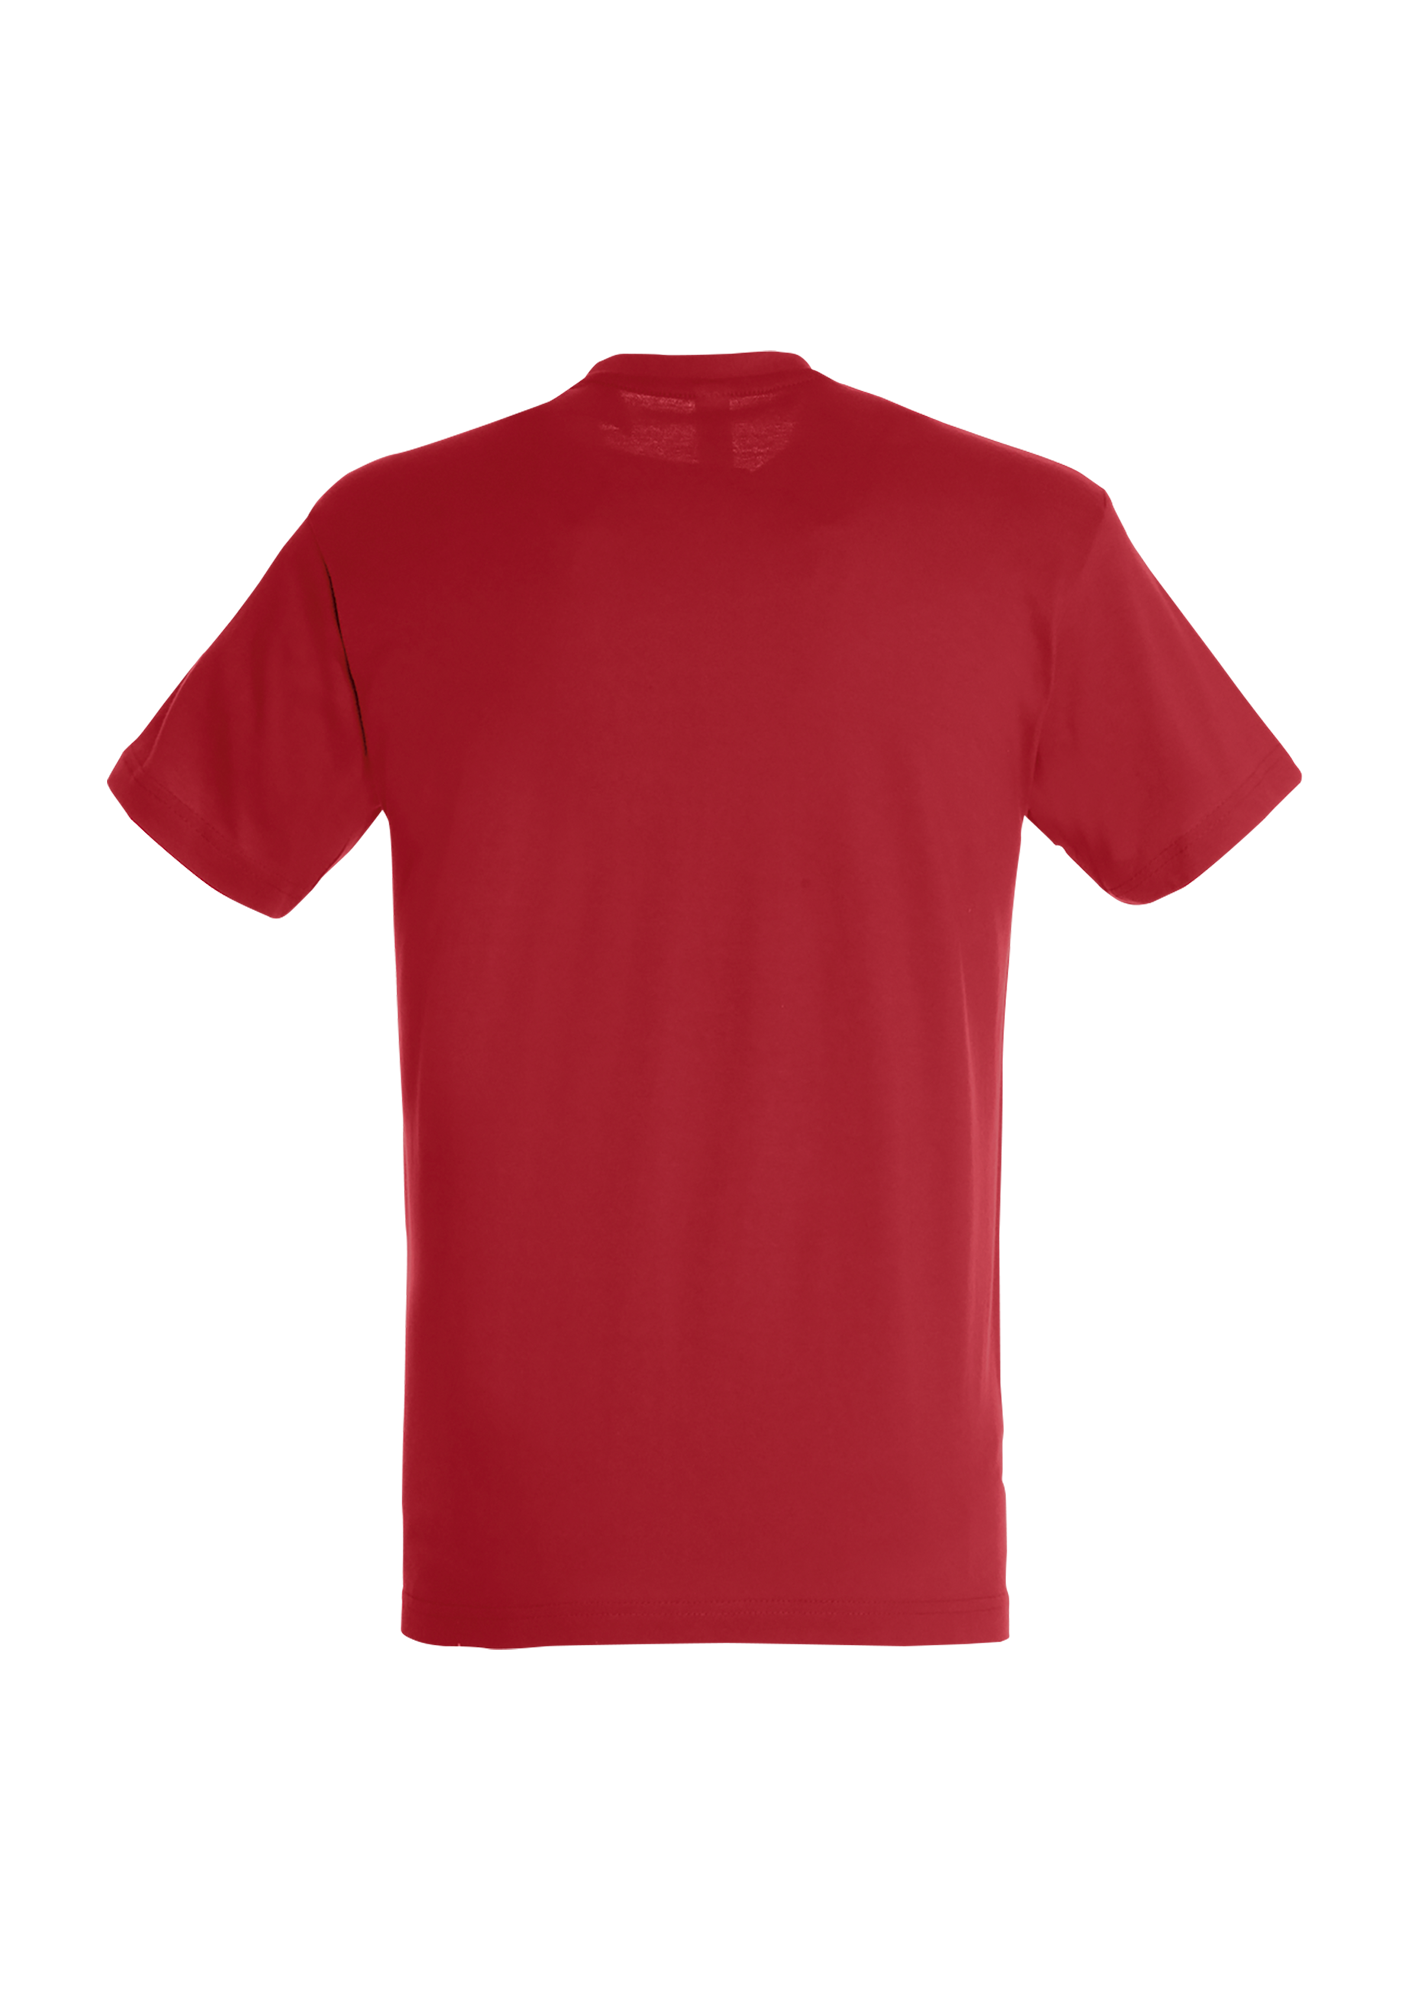 T-shirt Adulte Rouge "100 et Or" - n11380145B